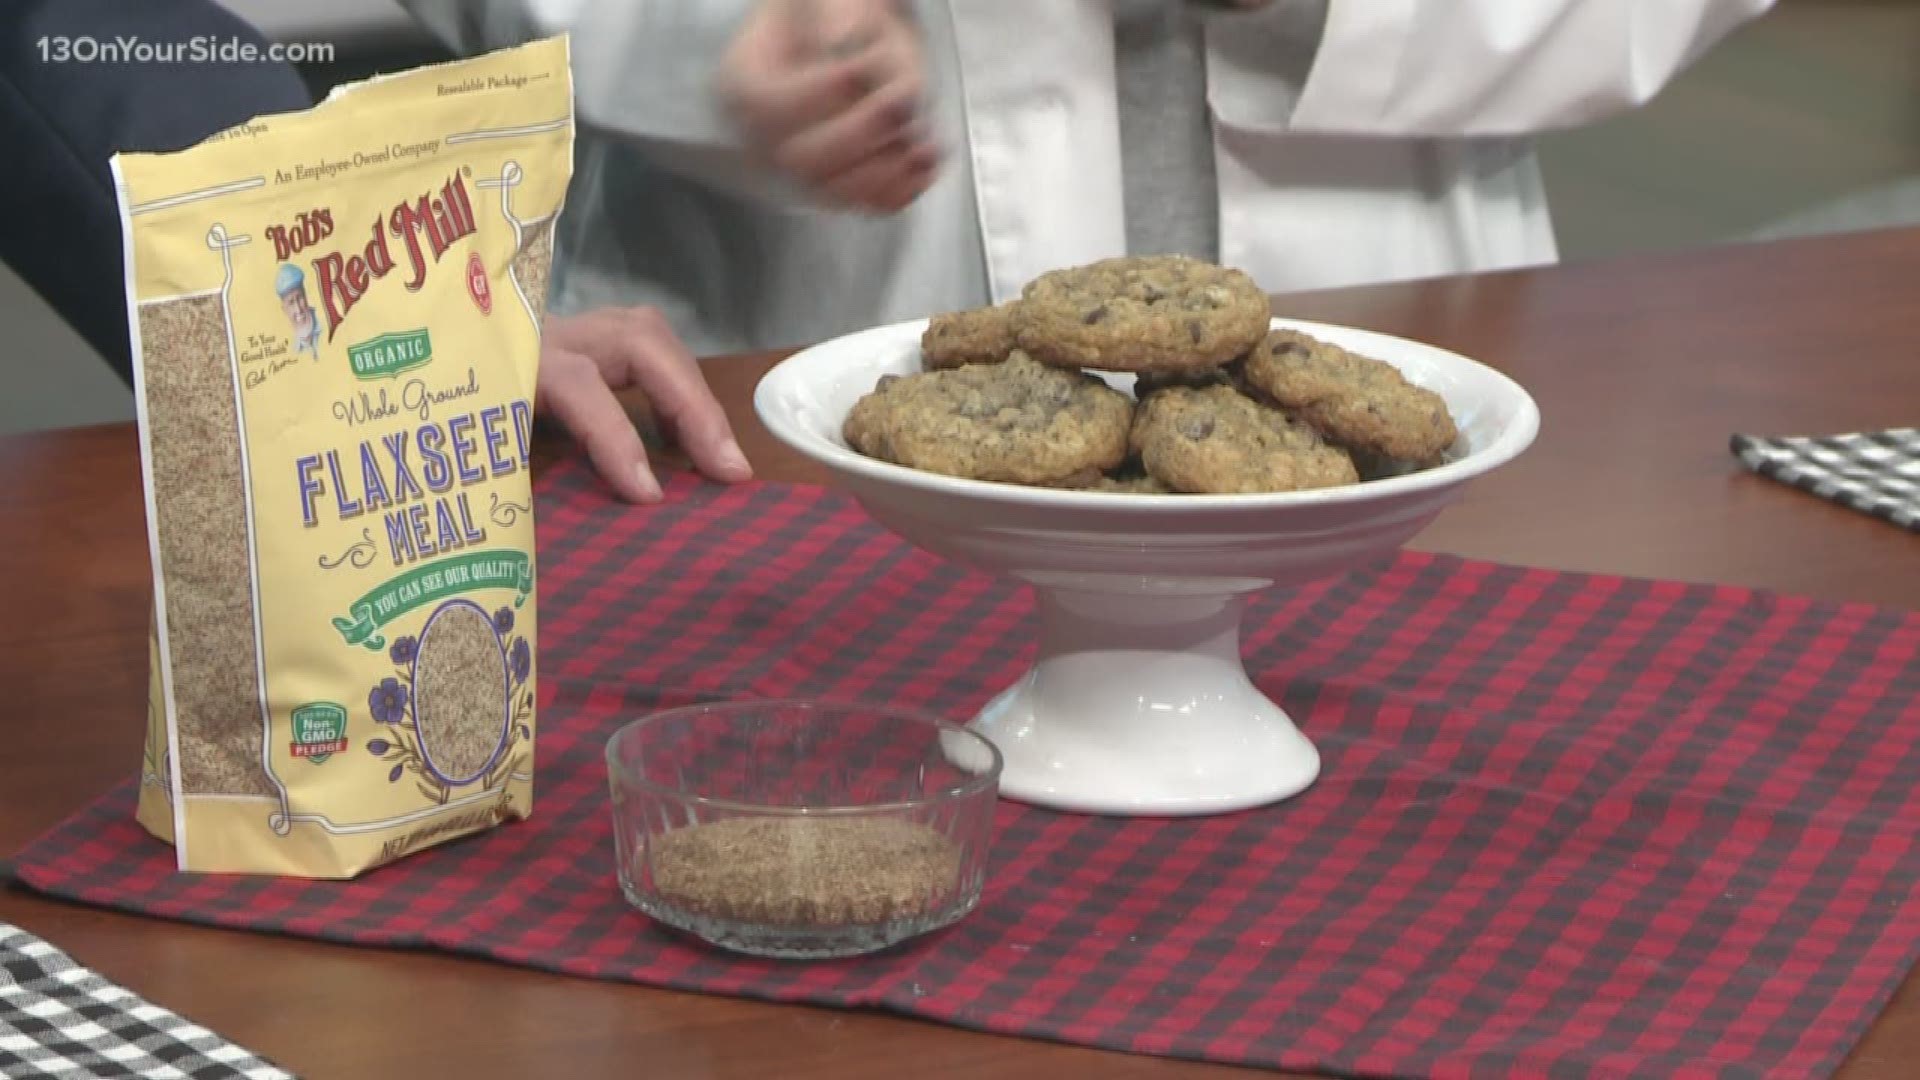 Registered Dietitian Tara Martin shares tips for making holiday recipes that are a bit healthier.